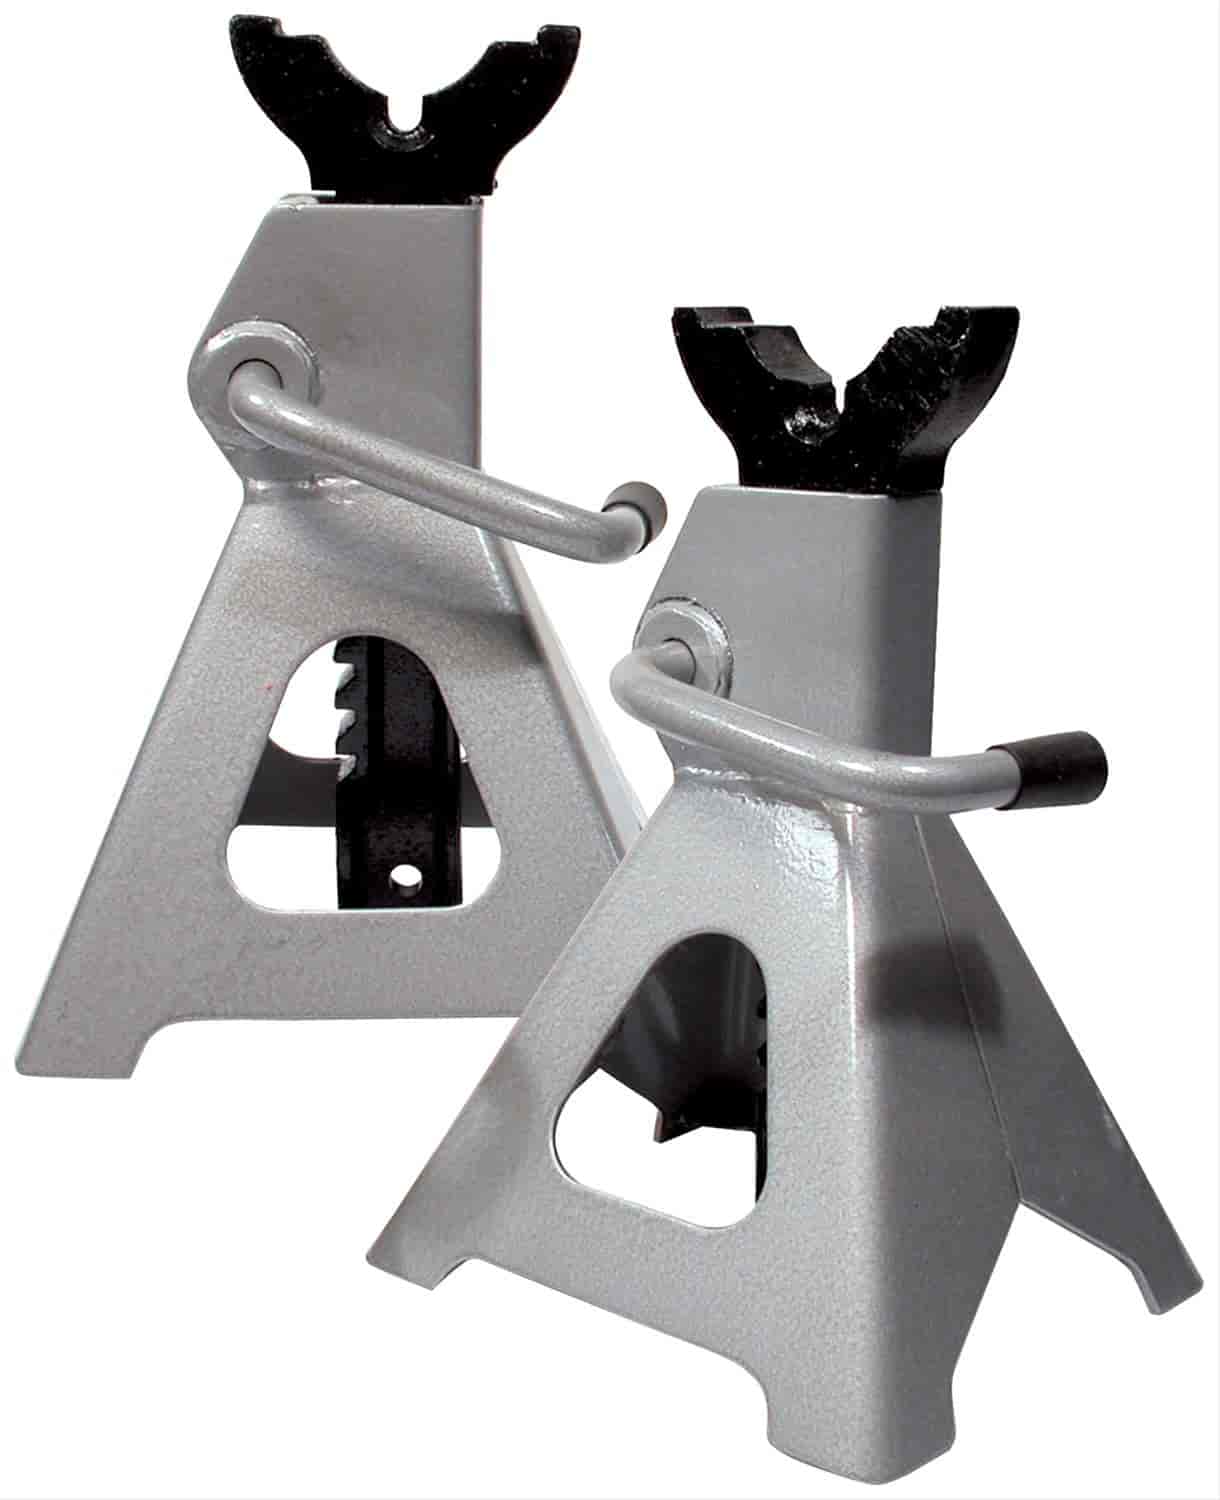 3-Ton Ratcheting Jack Stands Adjustable From 11-5/8" to 16-1/2"